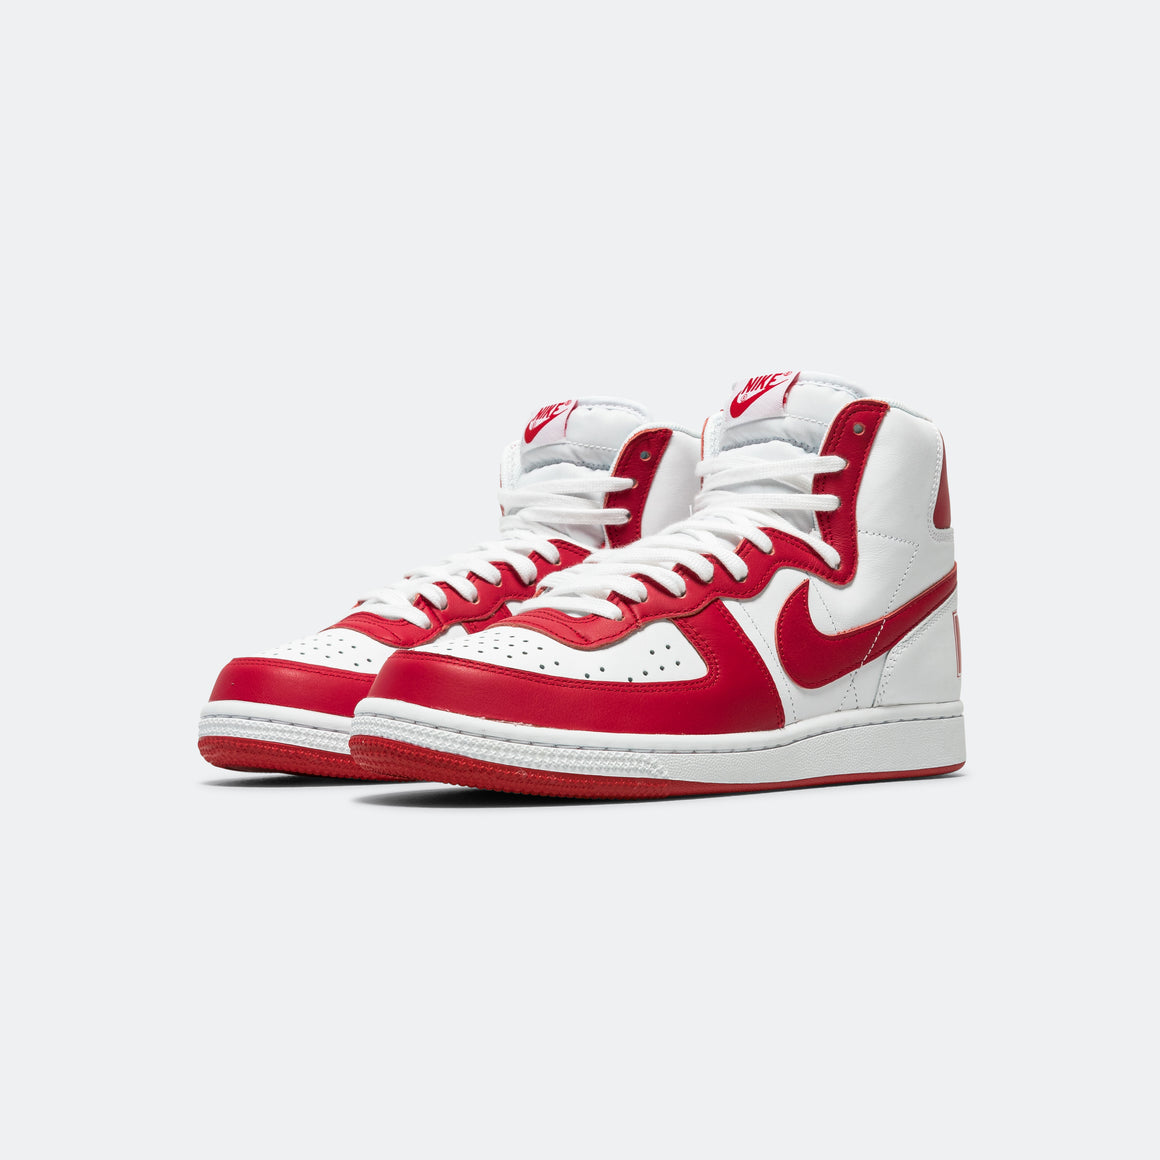 Nike - Terminator High - White/University Red - UP THERE